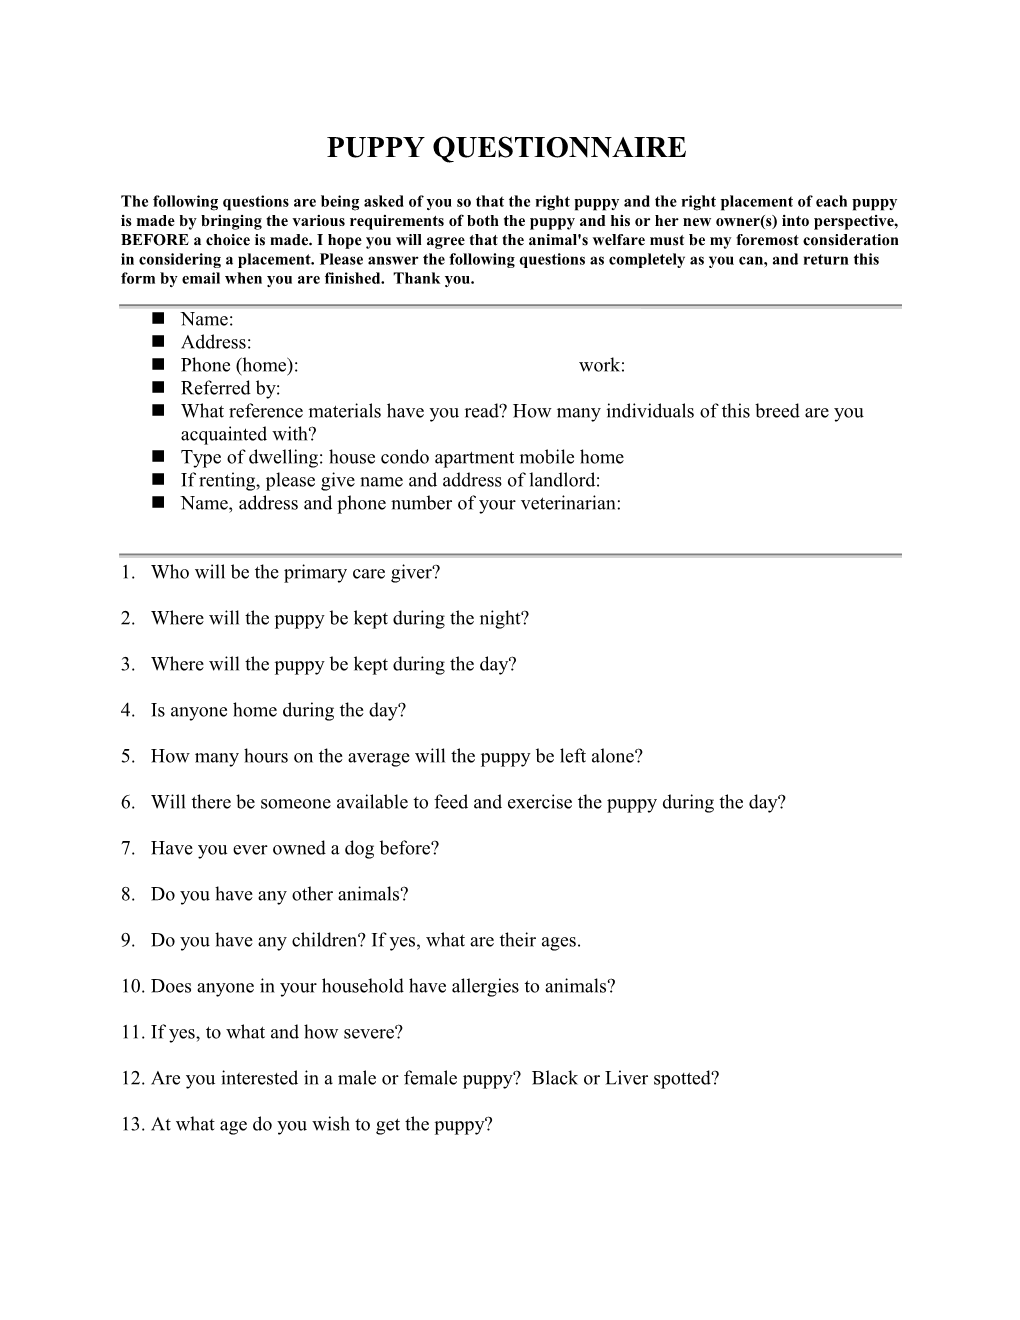 Sample Puppy Questionaire